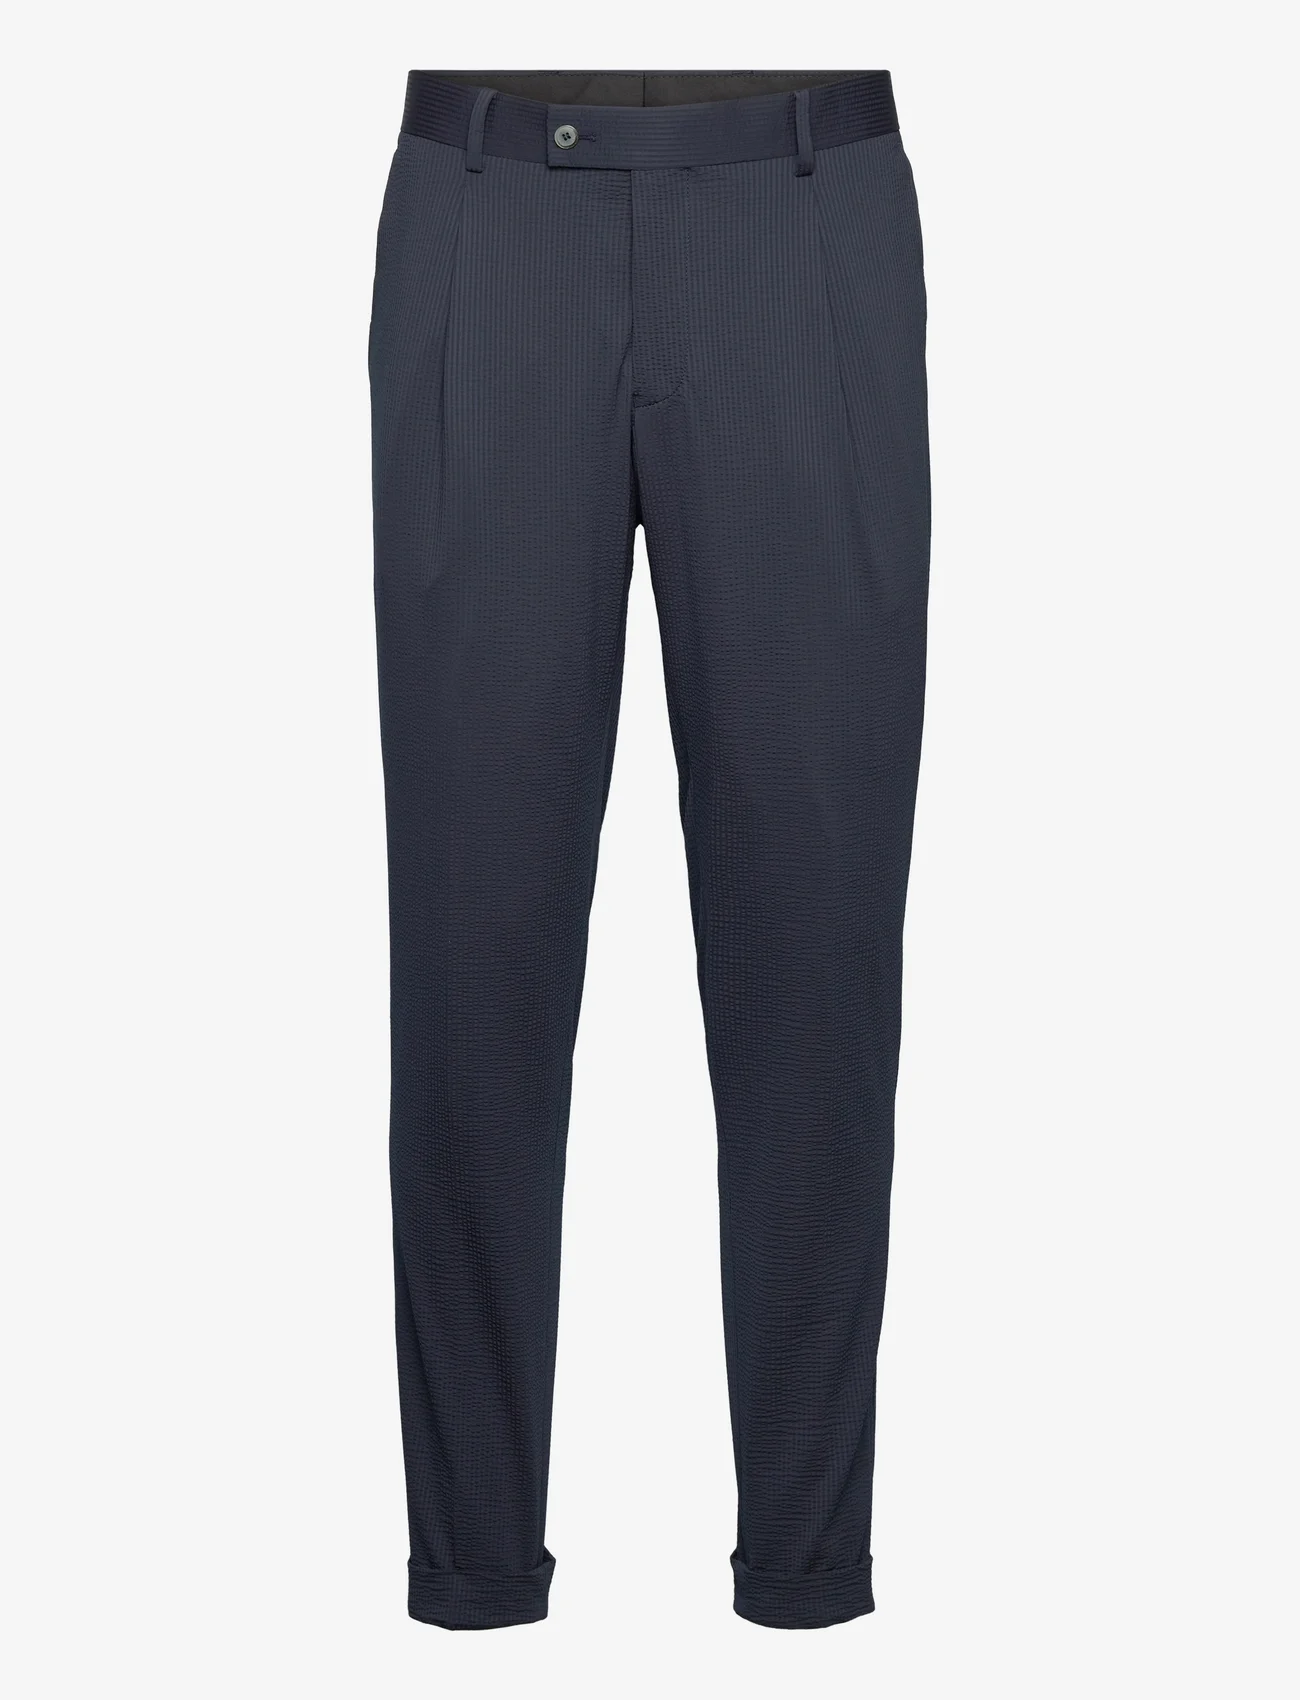 SIR of Sweden - Alex Trousers - linen trousers - navy - 0